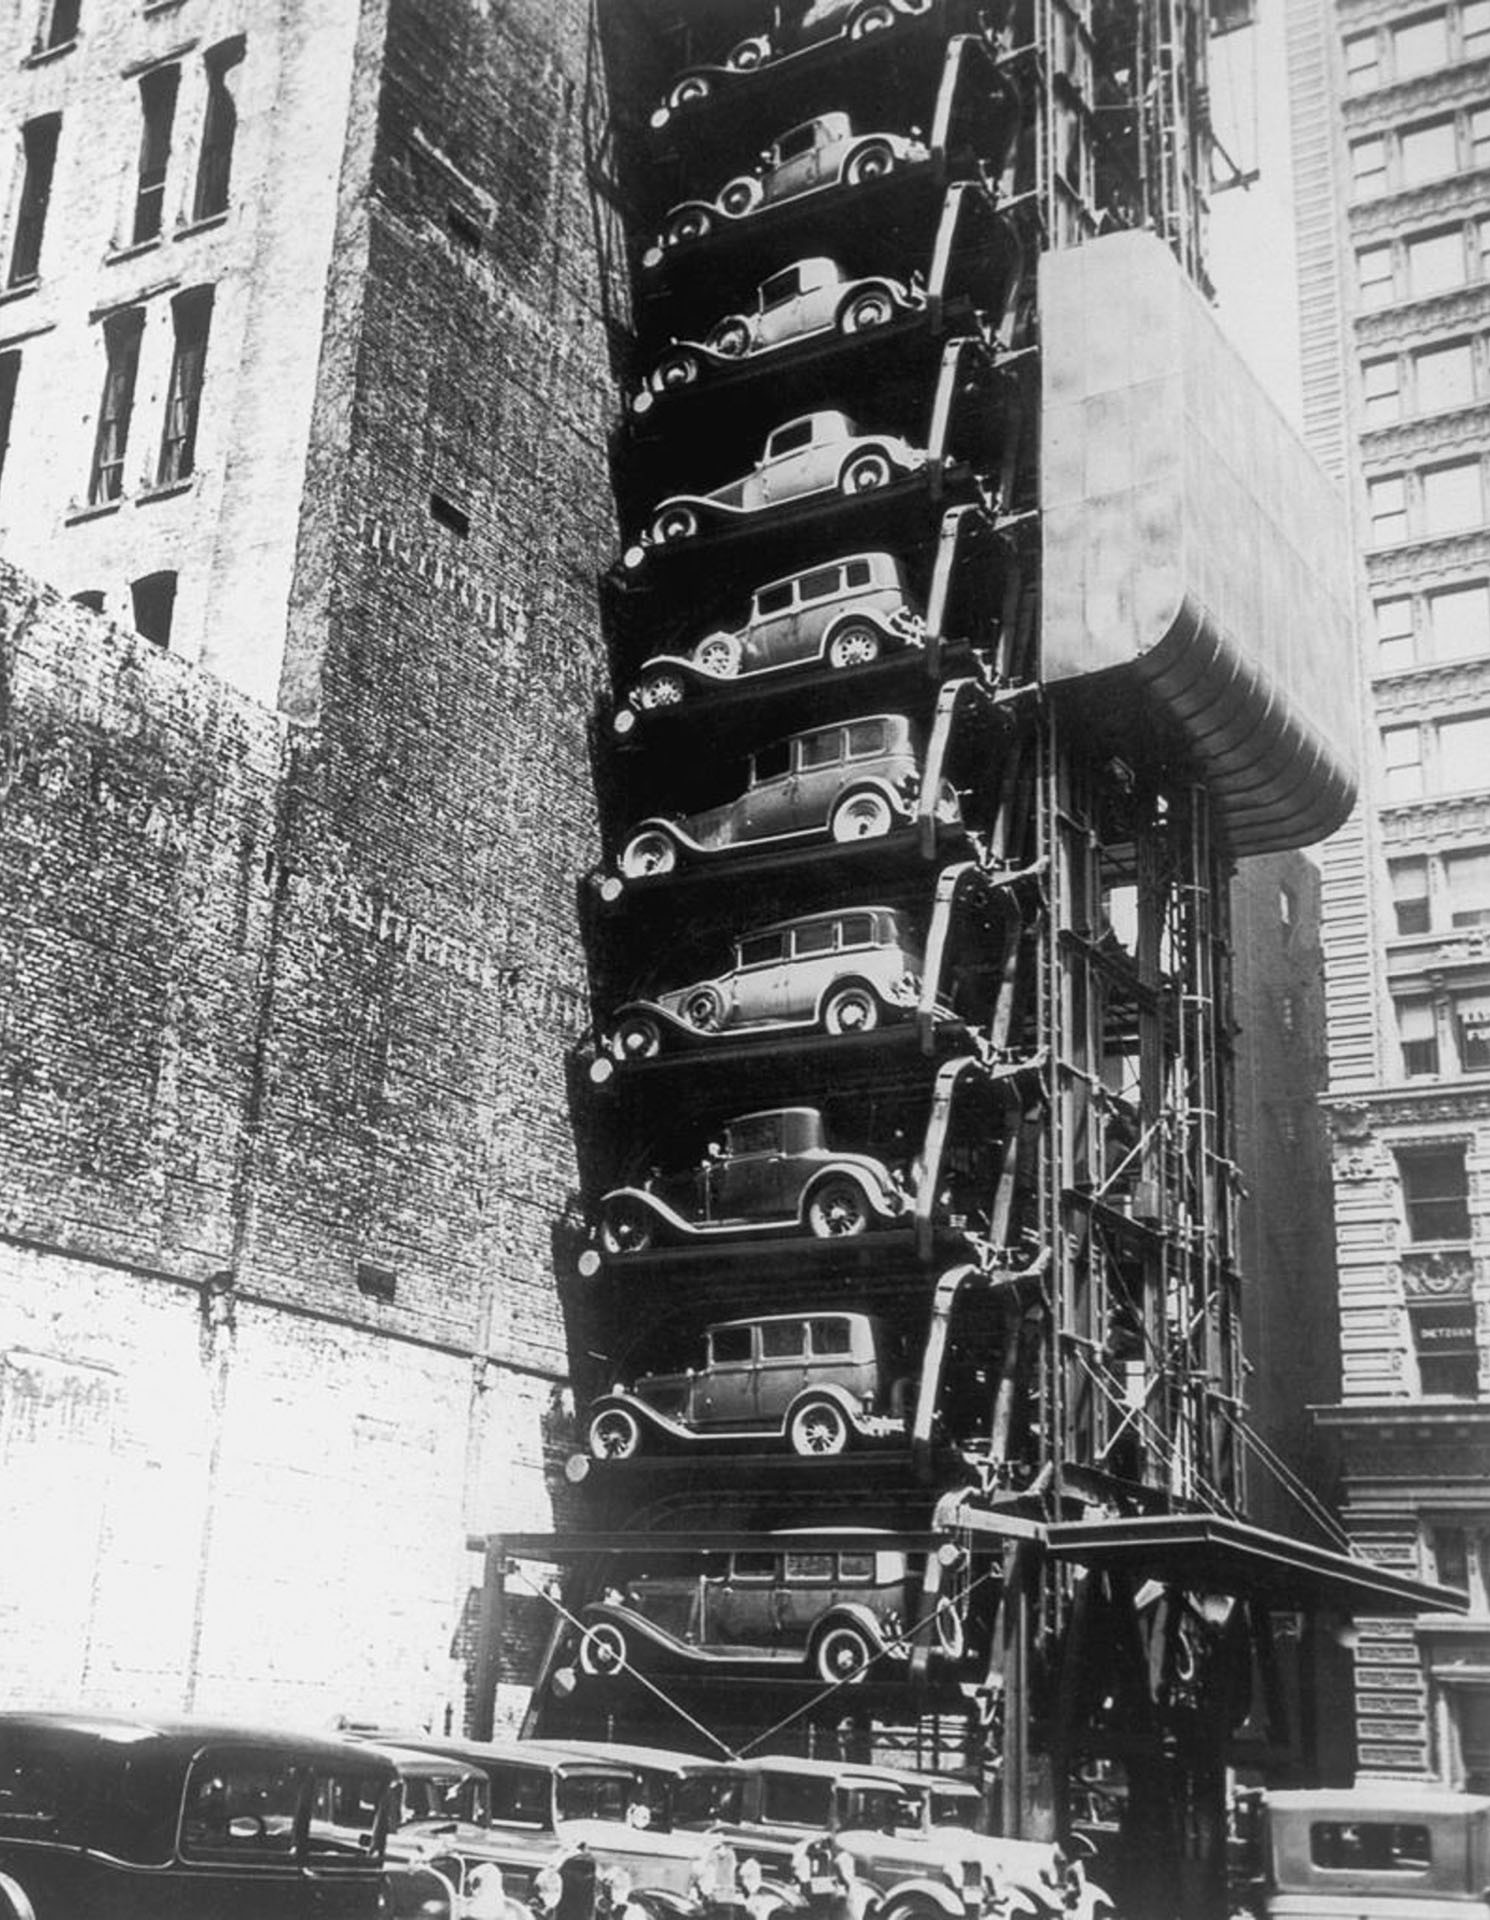 photography, Monochrome, Vintage, Elevator, Car, Classic Car, Parking, Building, USA, Urban, Technology, New York City, Portrait Display, Street, Model T, Ford, Old Photos Wallpaper